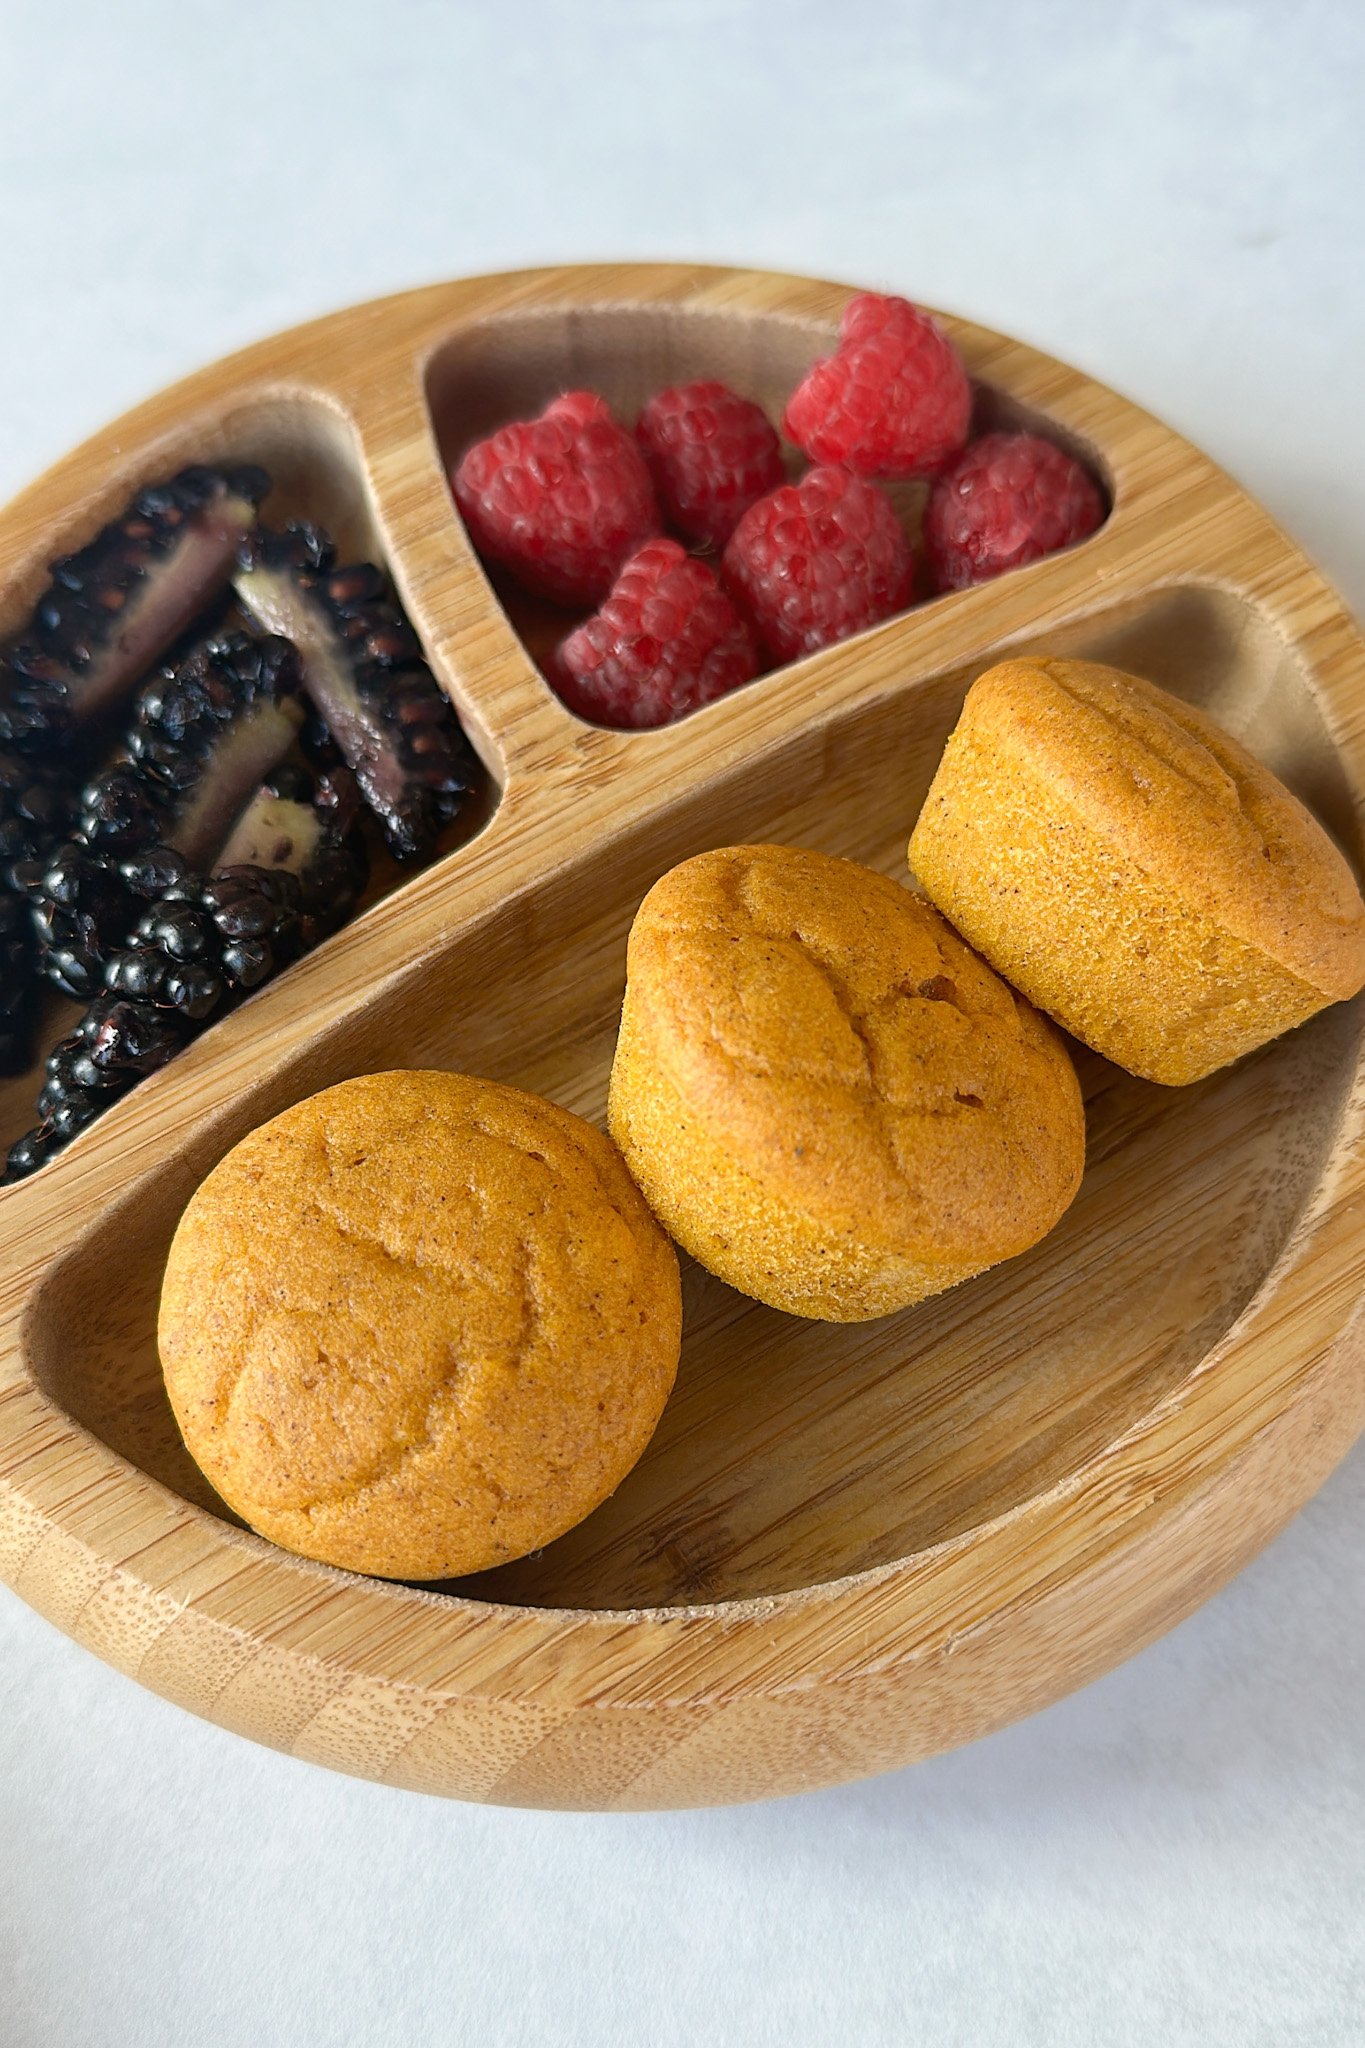 Pumpkin maple muffins served with berries.